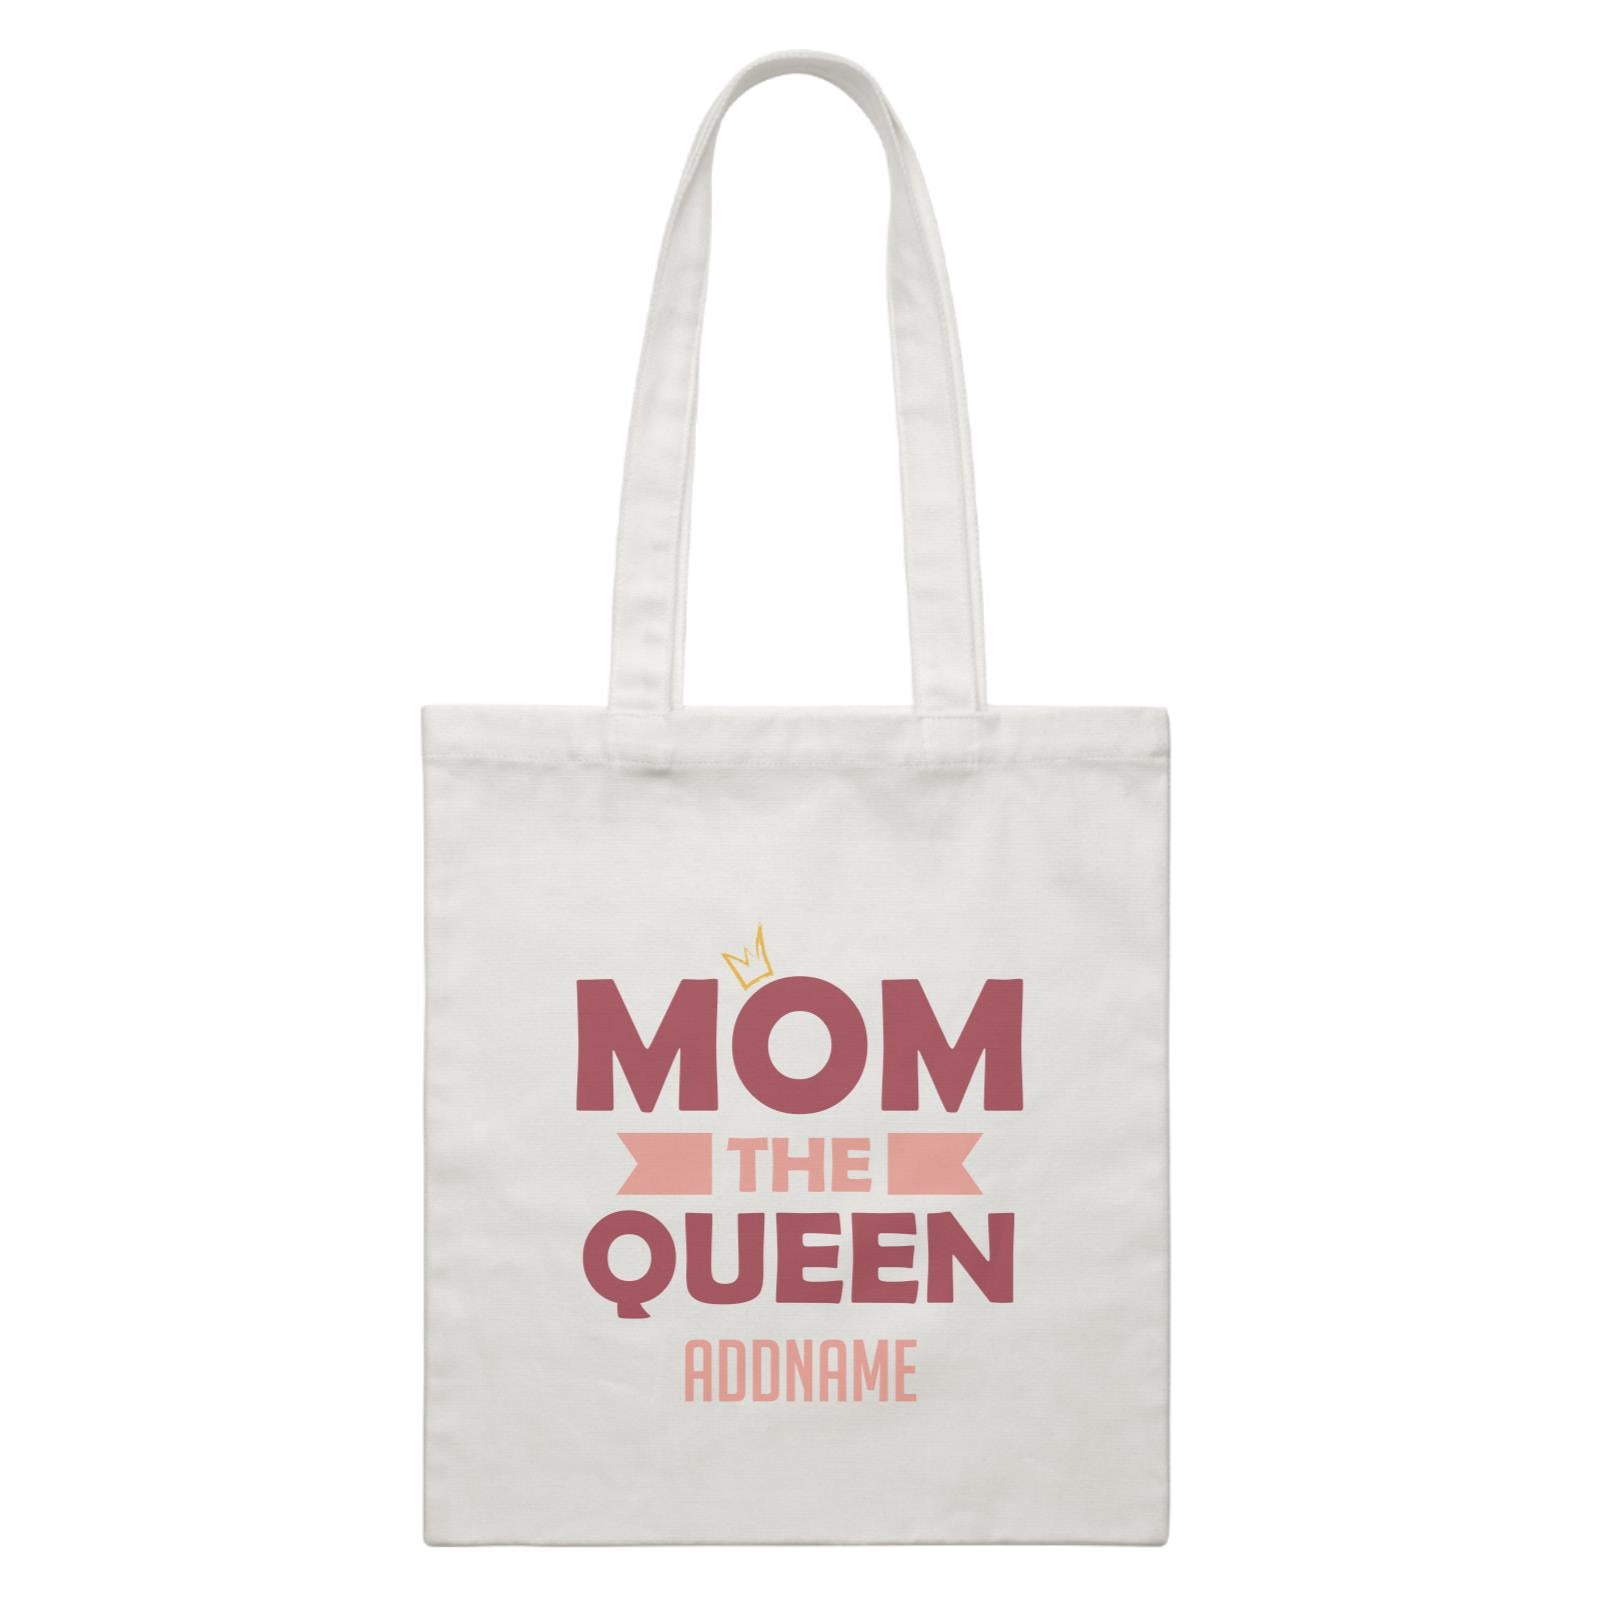 Awesome Mom 2 Mom The Queen Addname White Canvas Bag